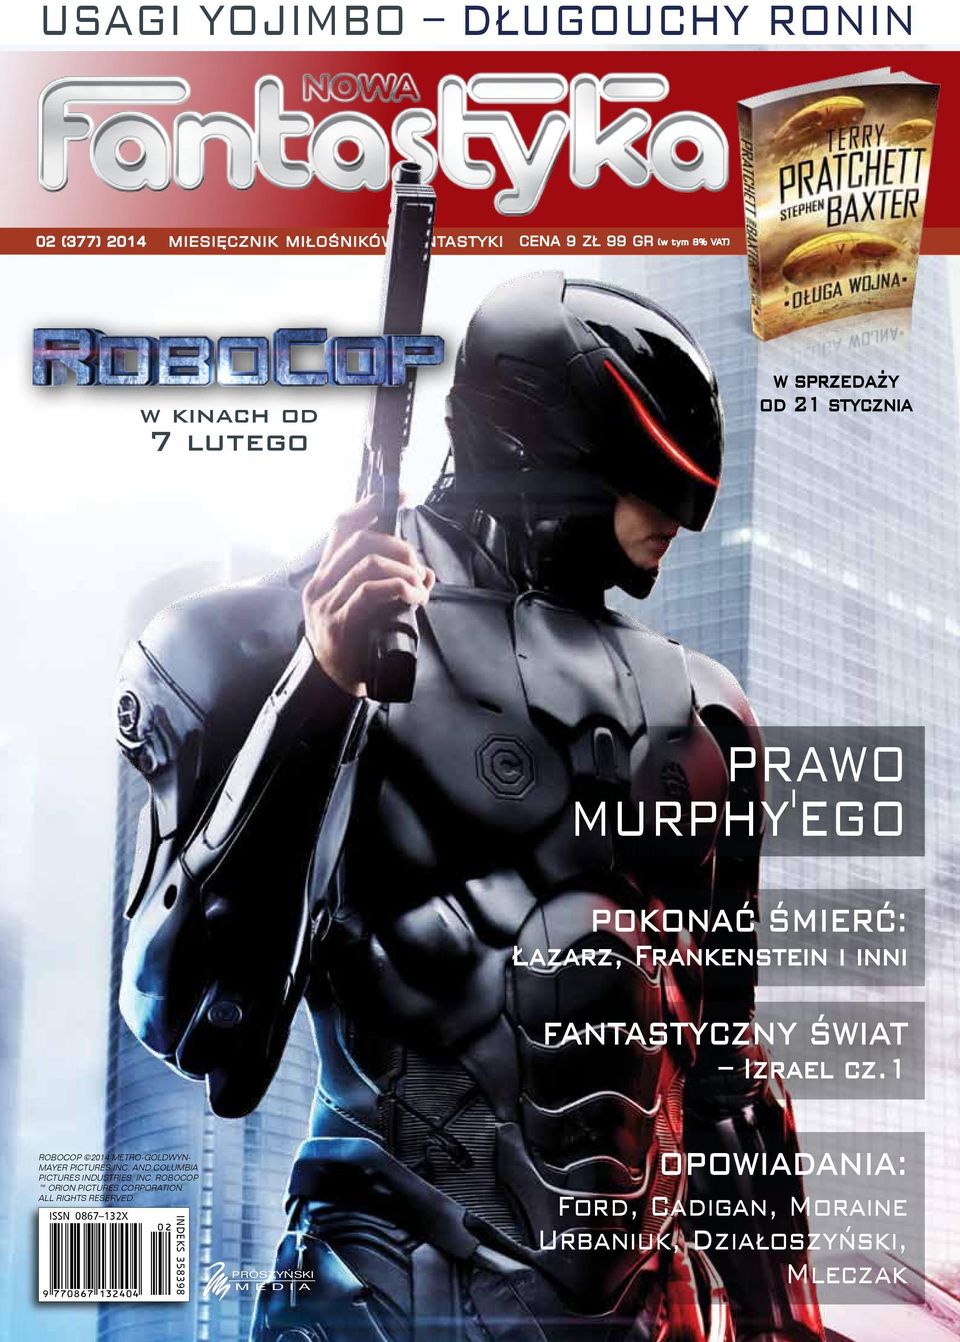 1 ROBOCOP 2014 Metro-Goldwyn- Mayer Pictures Inc. and Columbia Pictures Industries, Inc. ROBOCOP Orion Pictures Corporation.